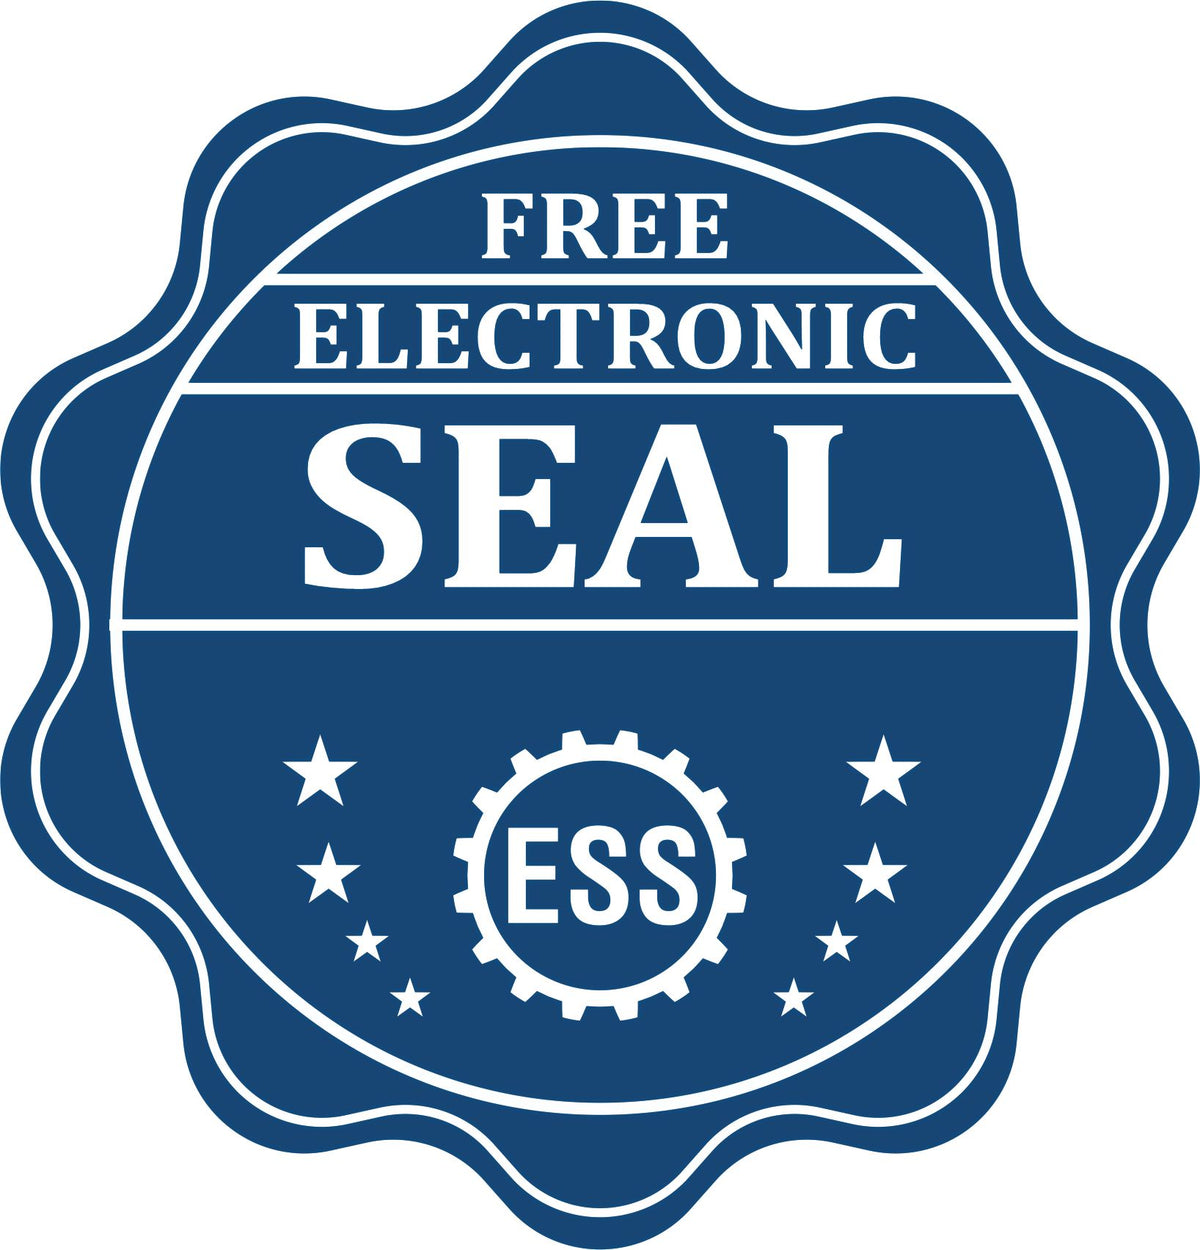 A badge showing a free electronic seal for the Oregon Geologist Desk Seal with stars and the ESS gear on the emblem.